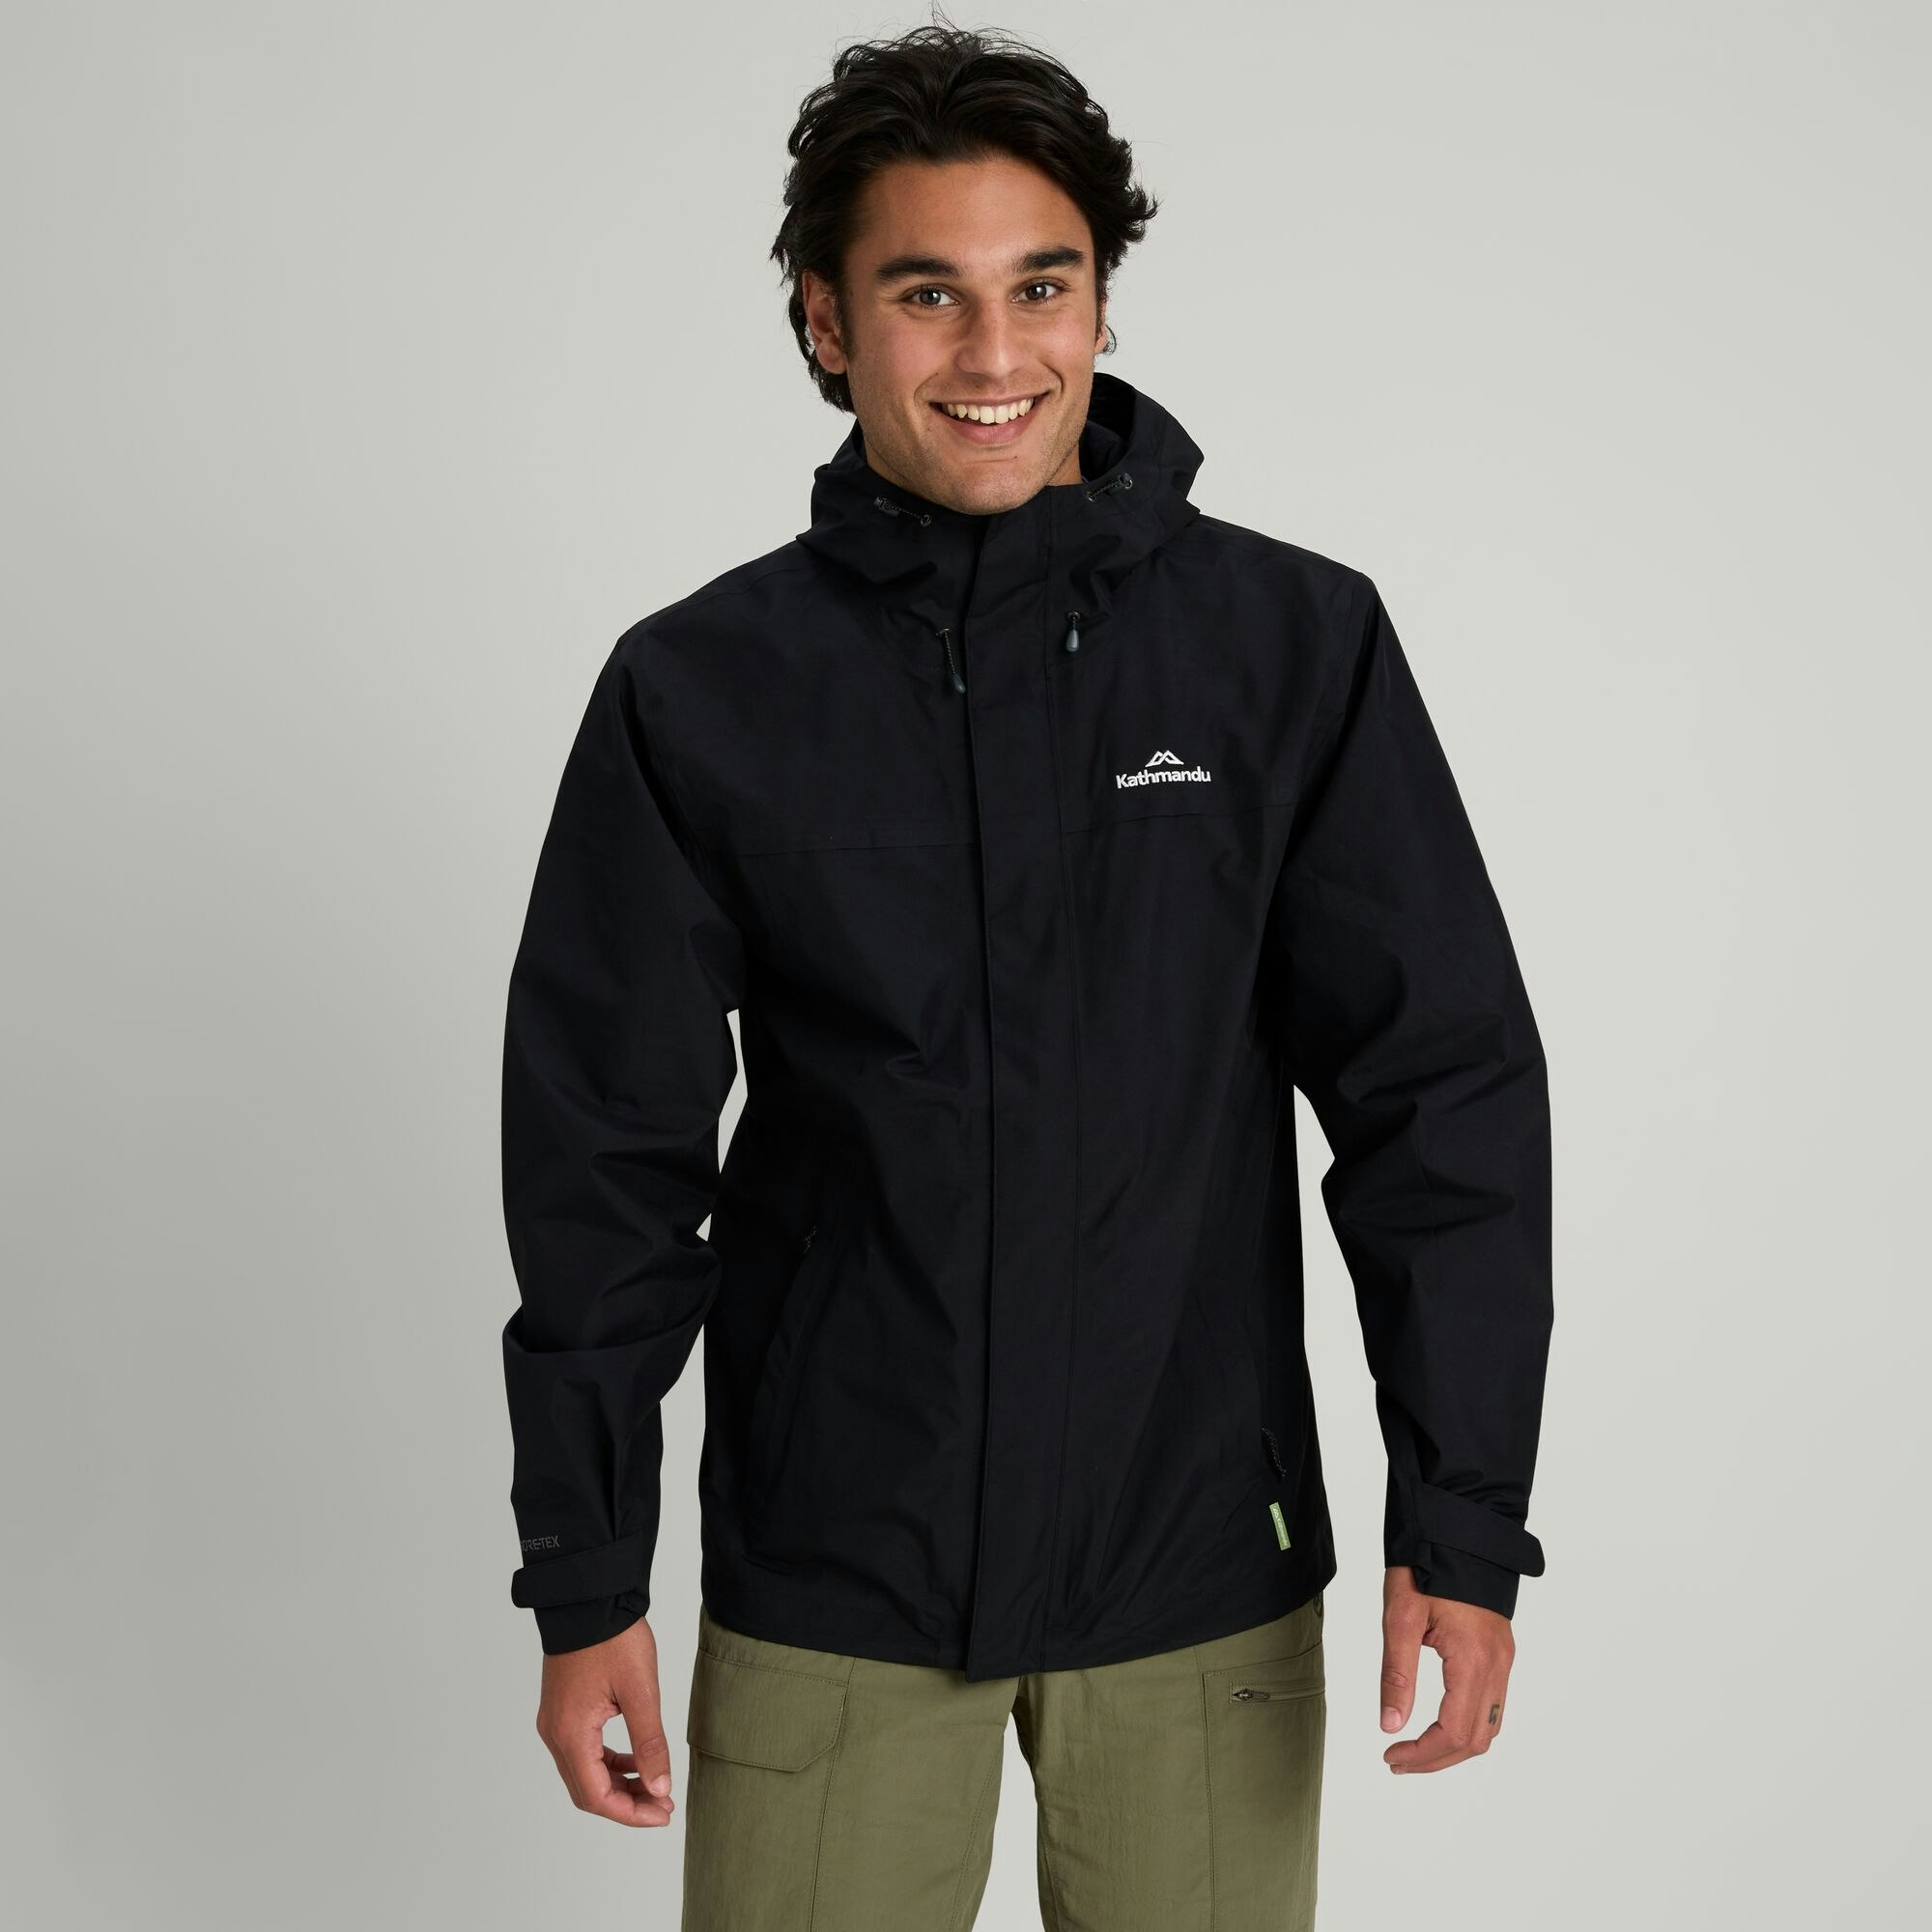 BOSS - Water-repellent jacket with rear ventilation